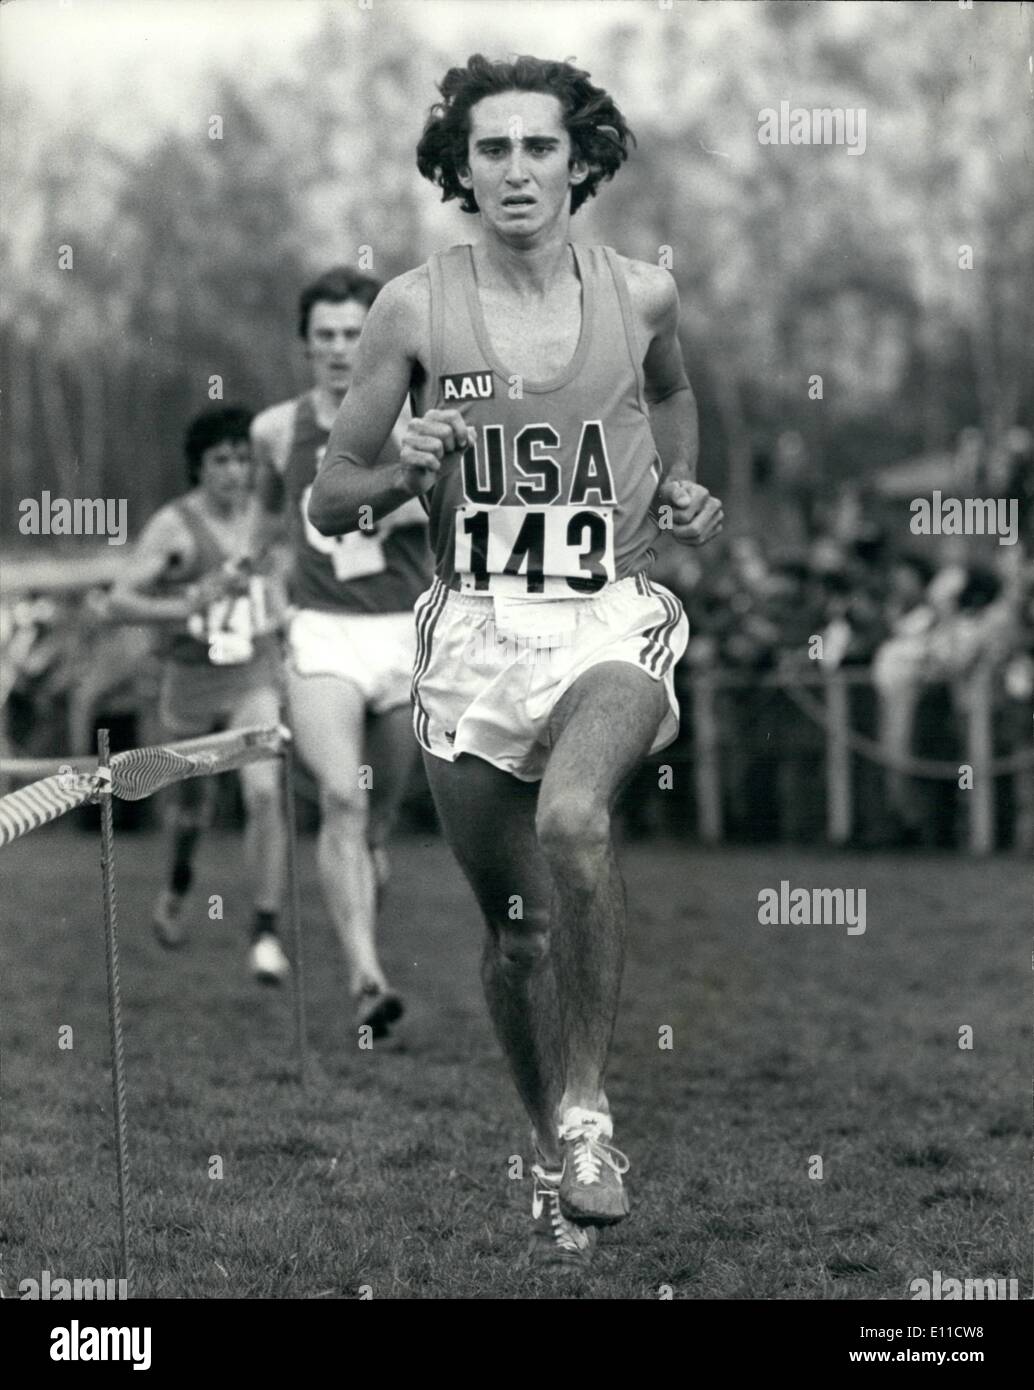 Mar. 03, 1977 - The I.A.A.F. cross country championships at Dusseldorf west Germany ; over the weekend the I.A.A.A.F cross country championship took place at Dusseldorf west Germany, with all the top European countries taking part. photo shows Thomas hunt of America no 143 seen winning the junior event of the cross country. Stock Photo